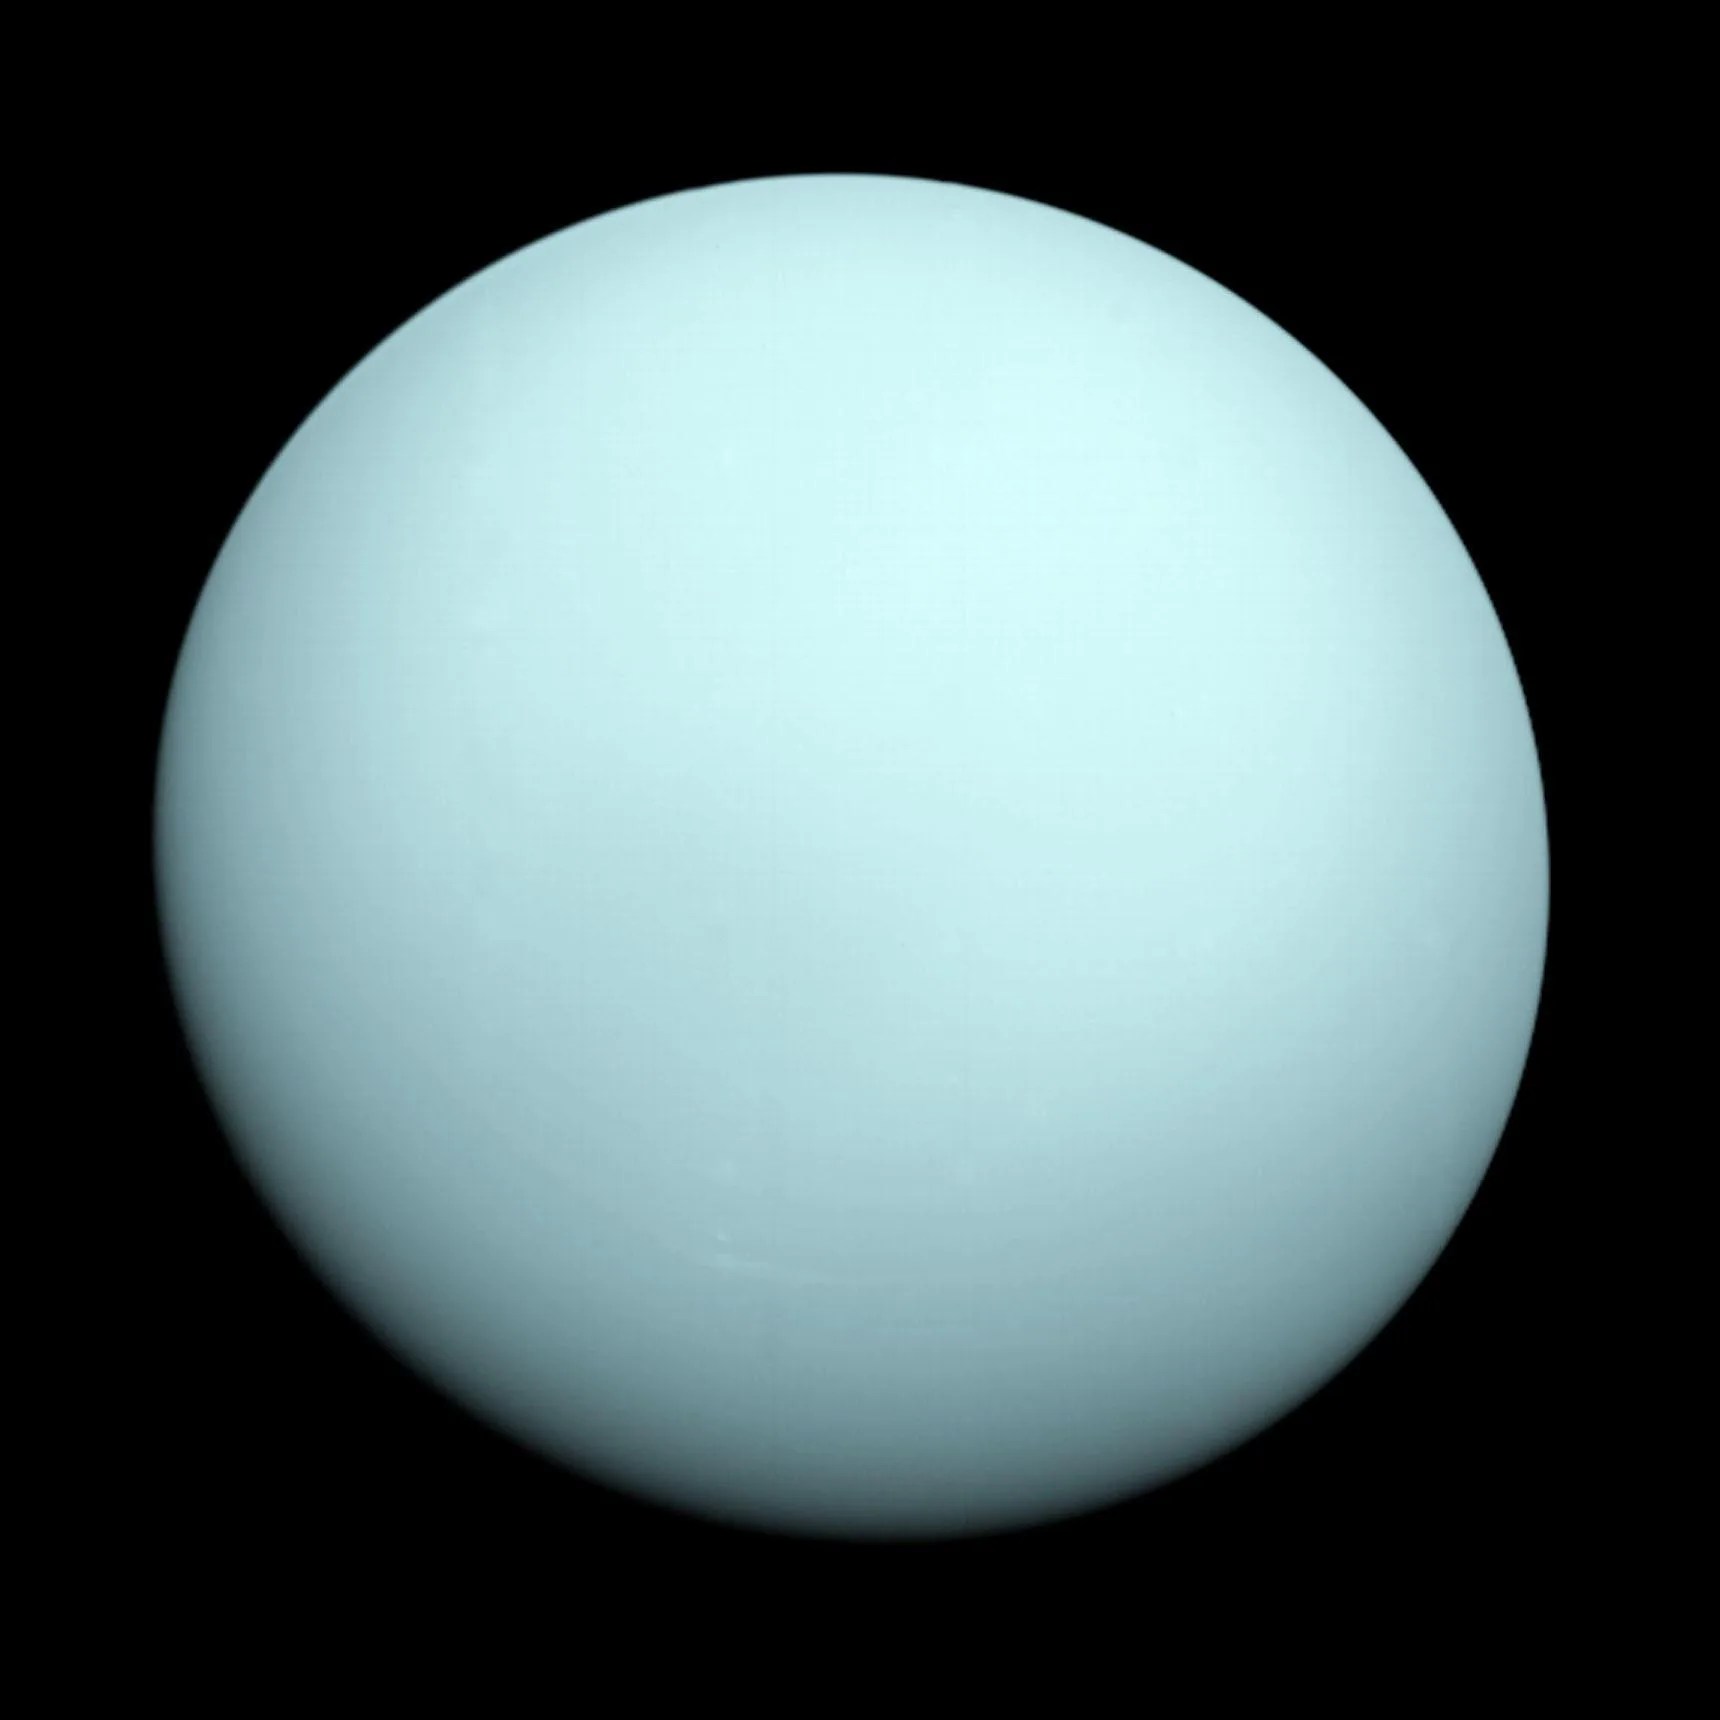 Uranus appears as a bright, turquoise planet.